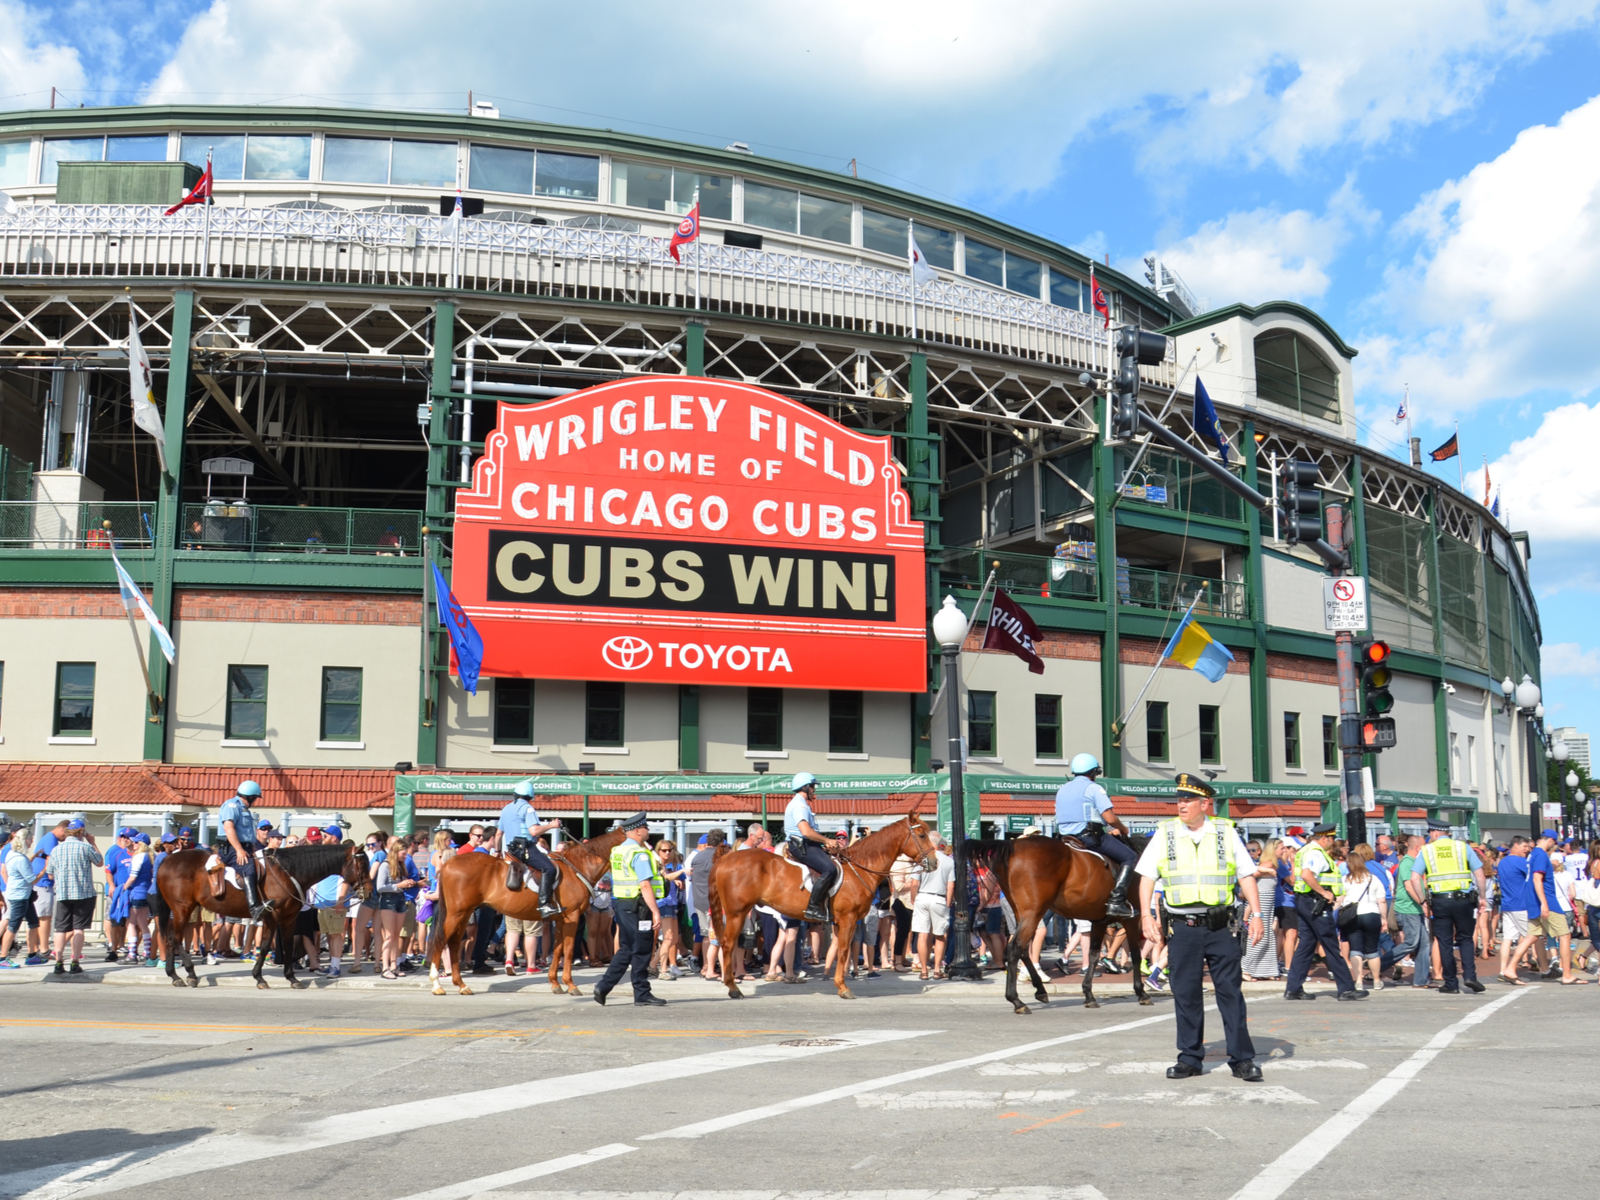 Our top pick for the best attractions in Chicago, Wrigley Field